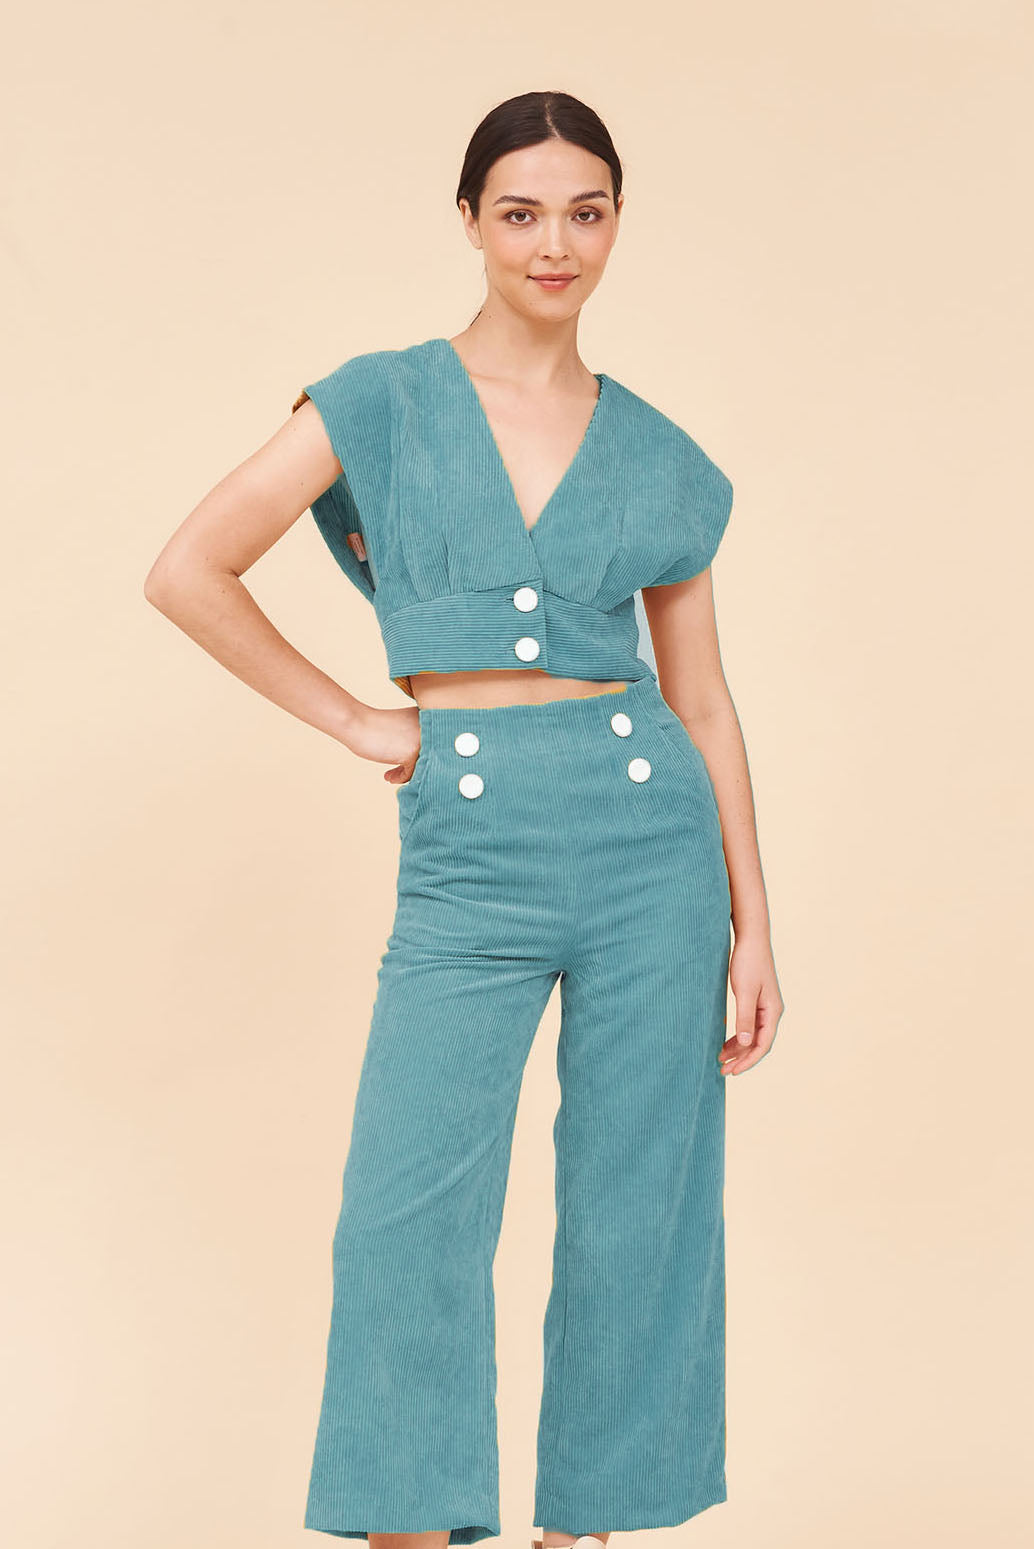 "SUNSHINE" 3/4 High Waist Culottes In Aqua Blue Cotton Corduroy with White Contrast Buttons